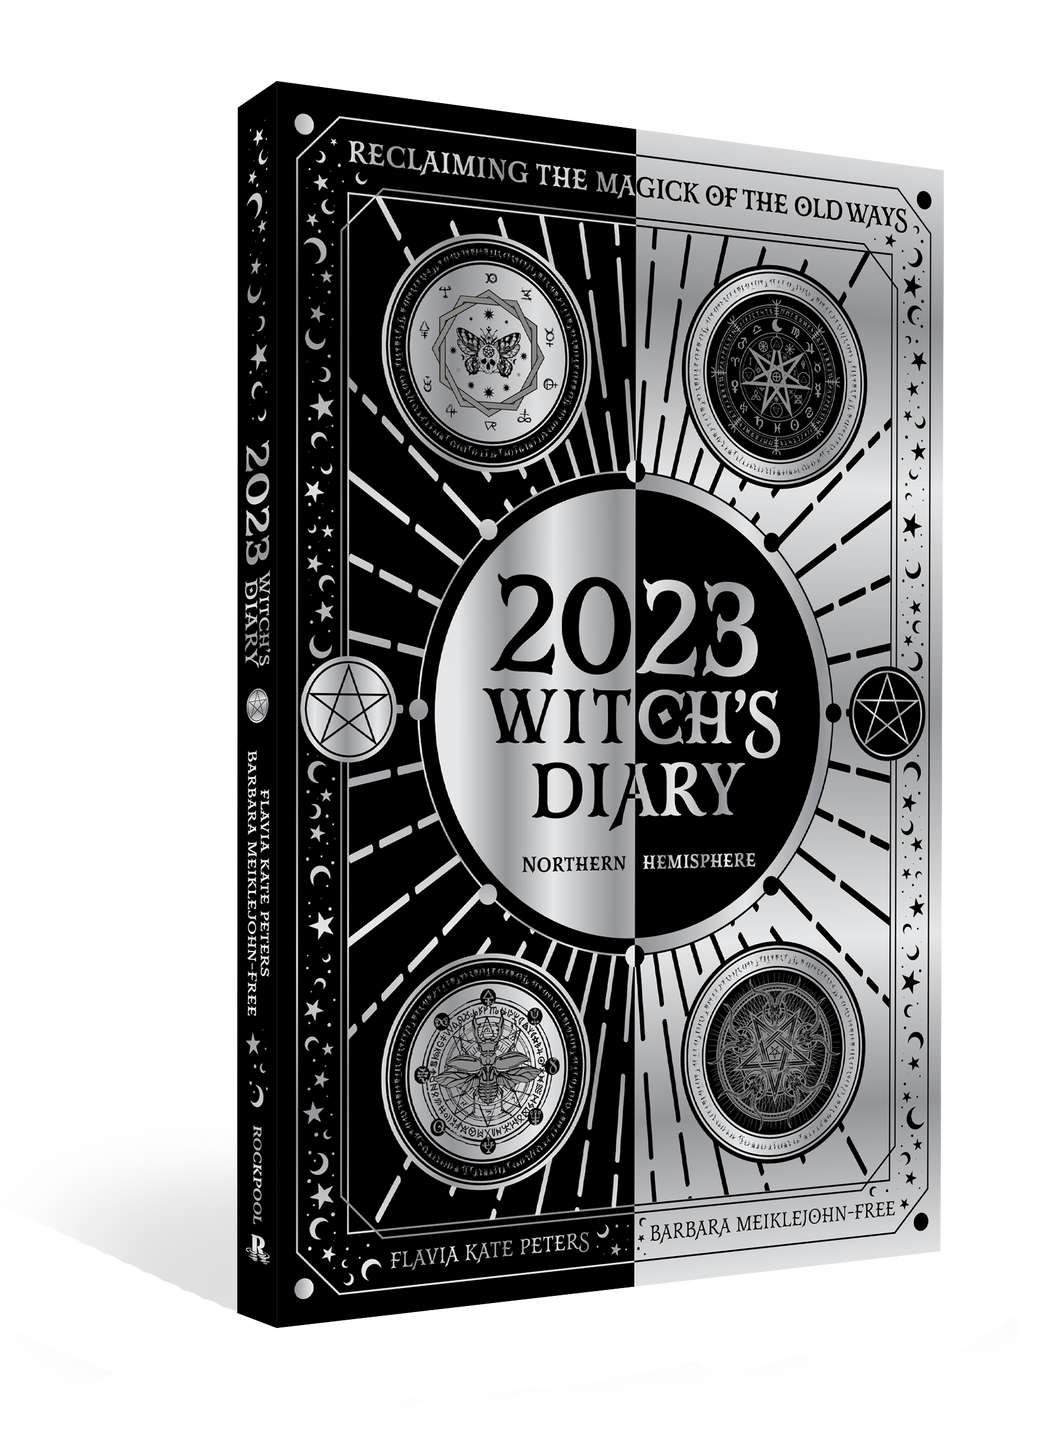 2023 Witch's Diary: Reclaiming the Magick of the Old Ways